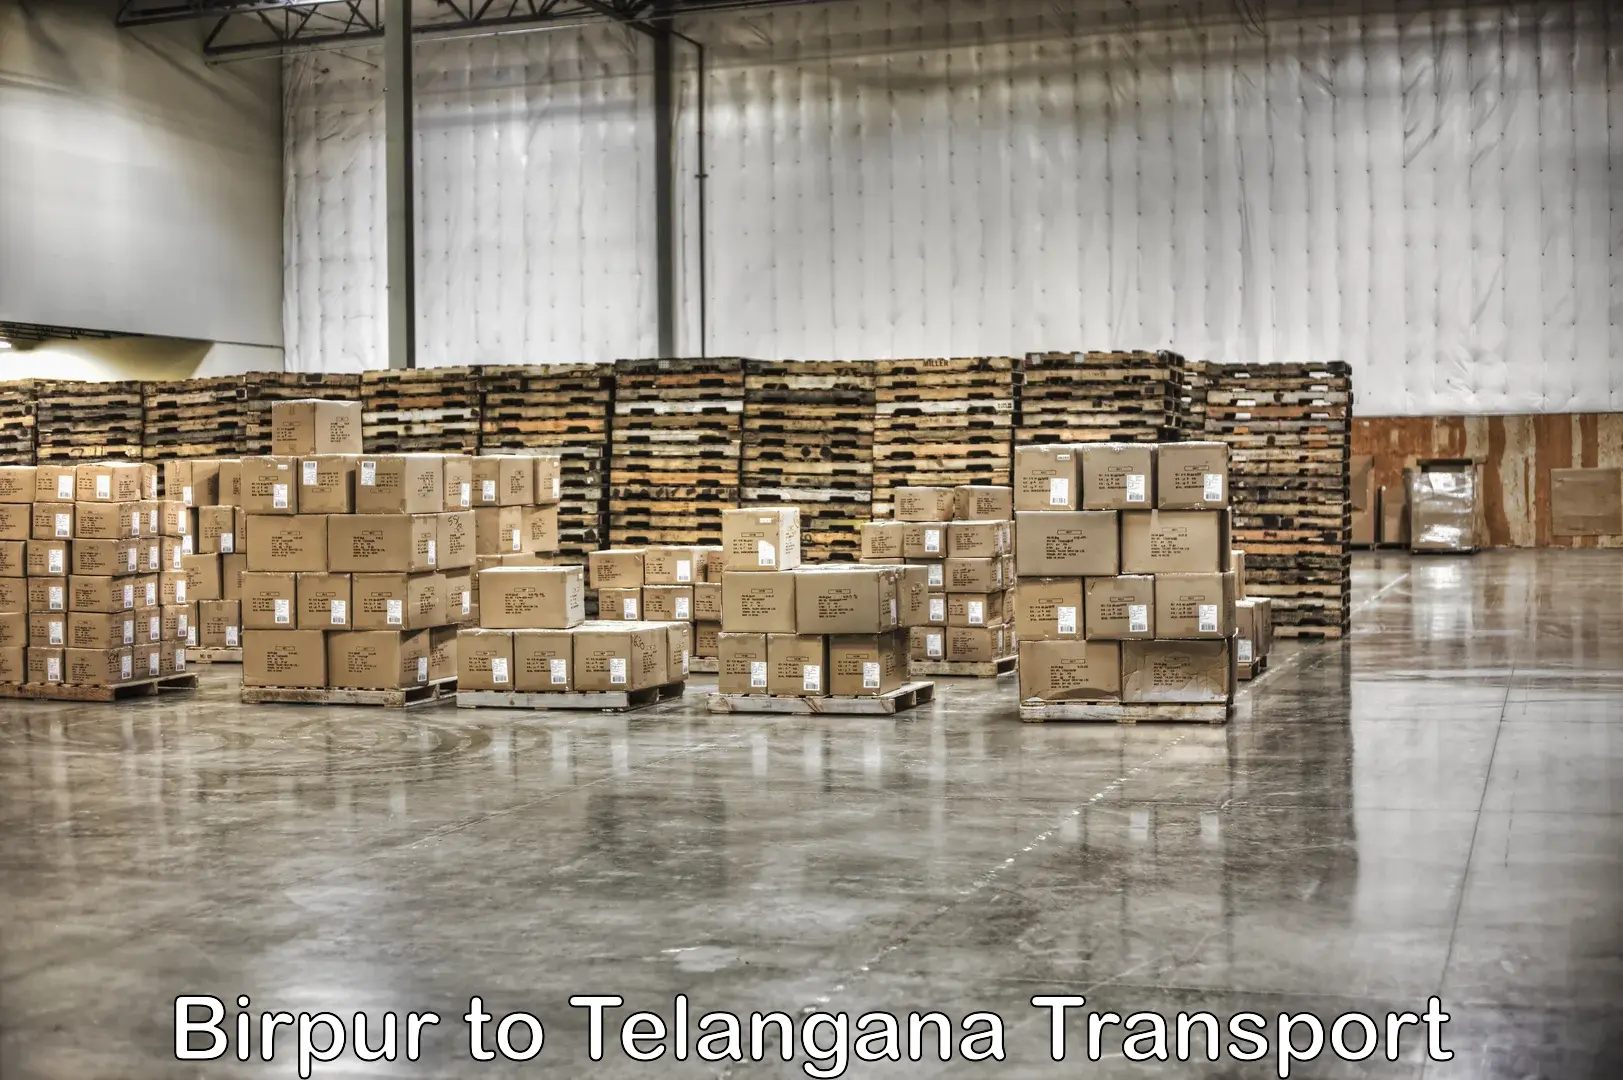 Truck transport companies in India Birpur to Gadwal